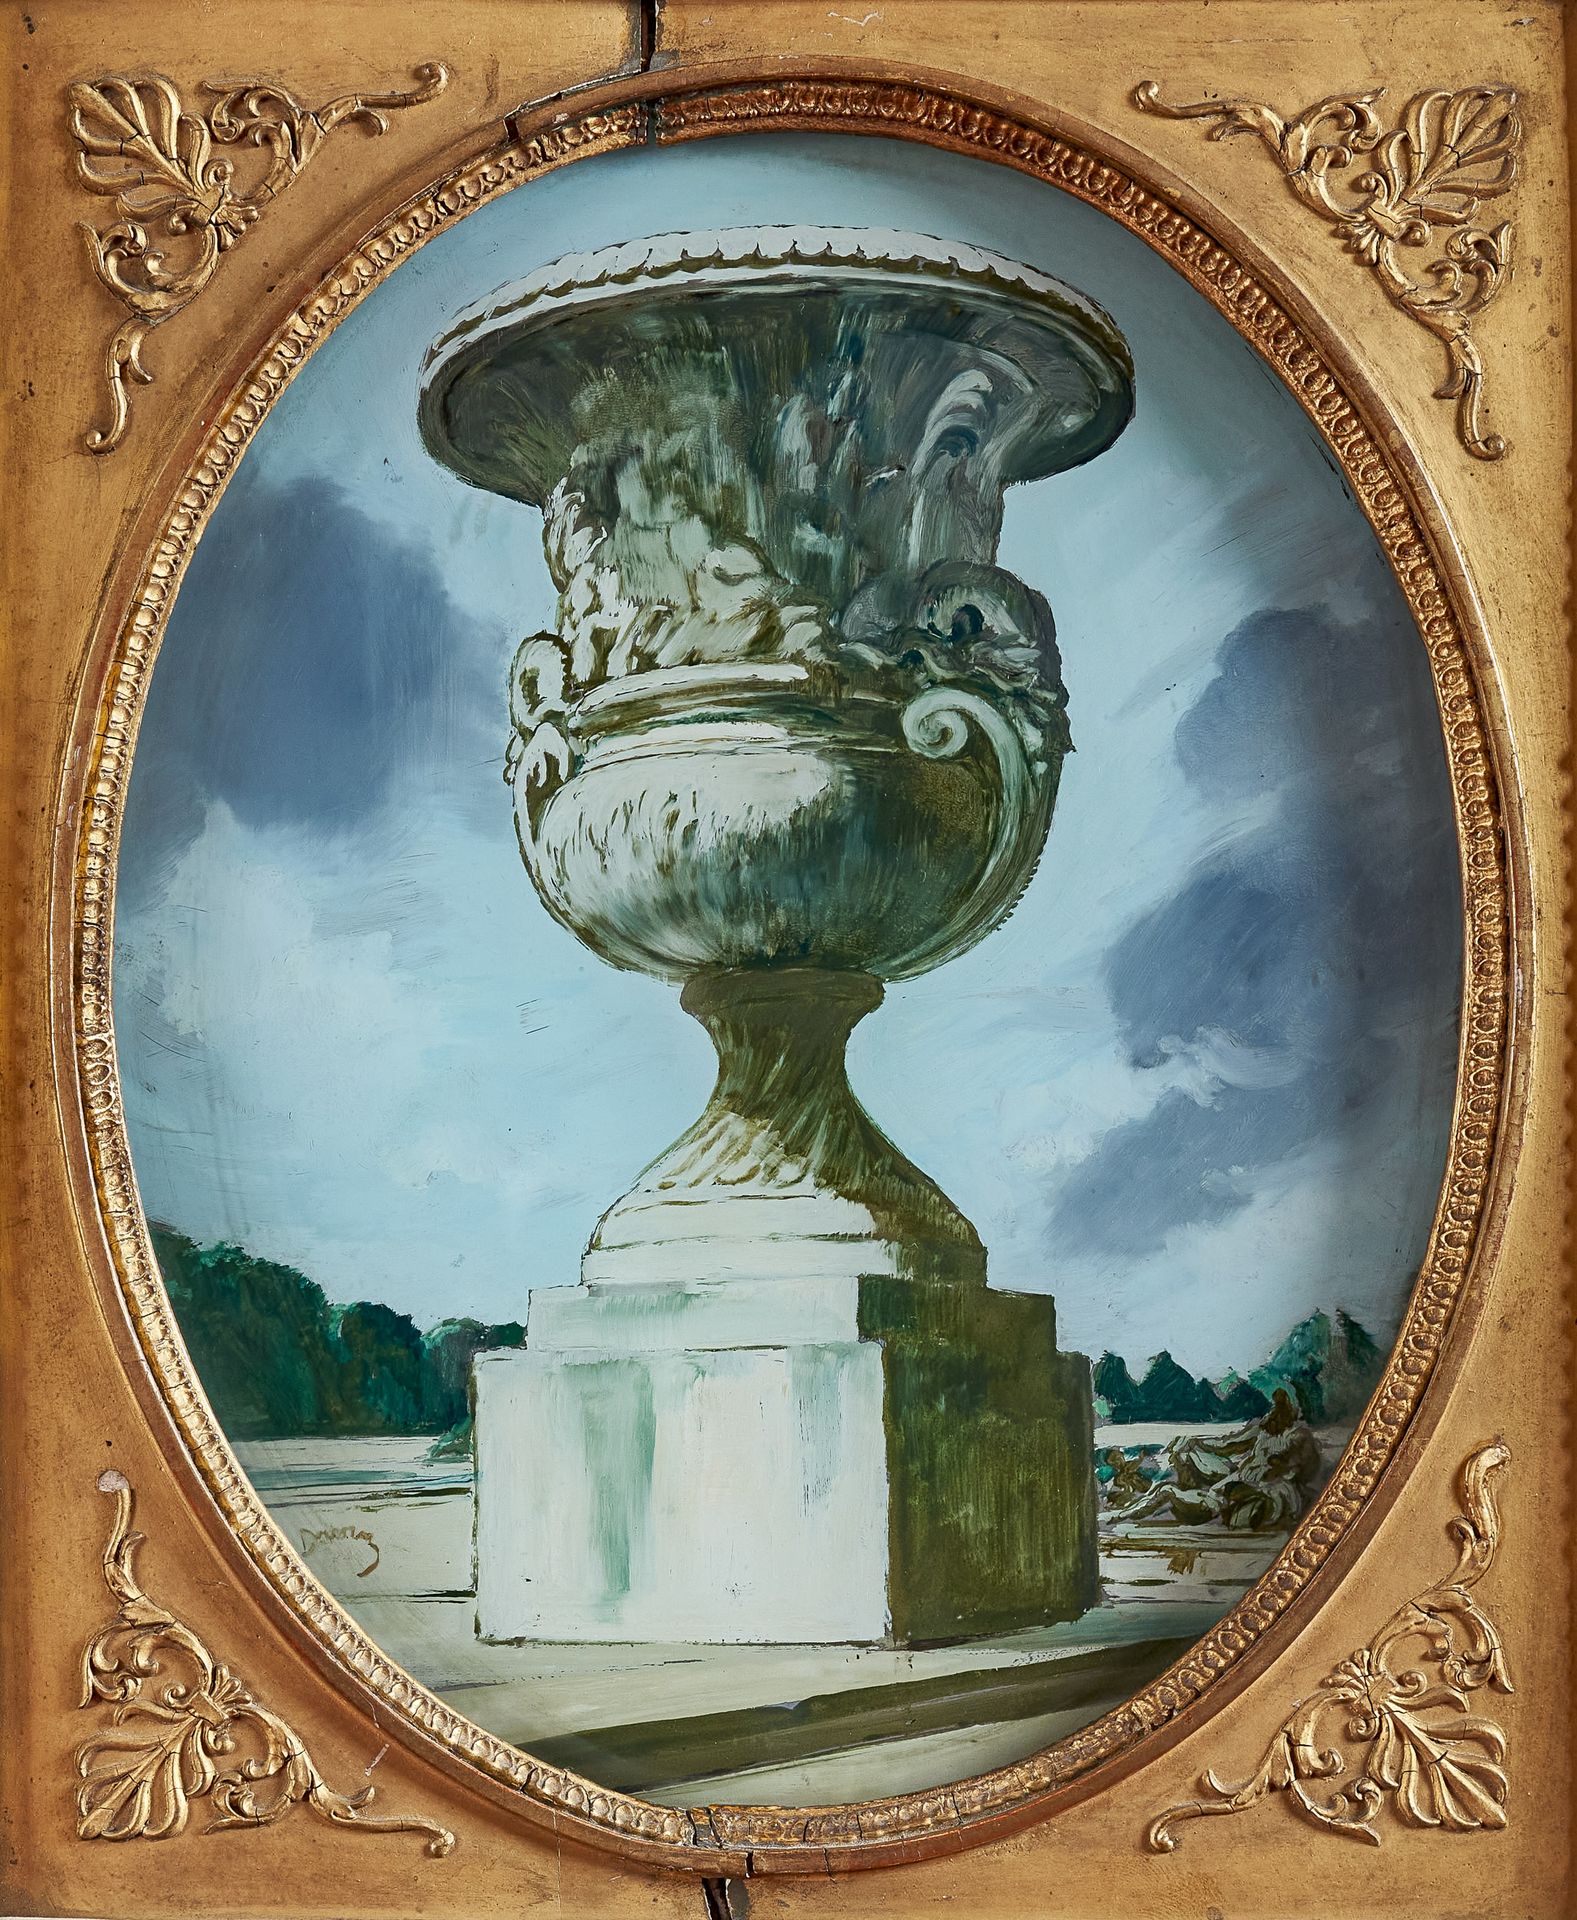 Null ADRIEN DÉSIRÉ ETIENNE KNOWN AS DRIAN (1885-1961)

Vase of Peace in the Park&hellip;